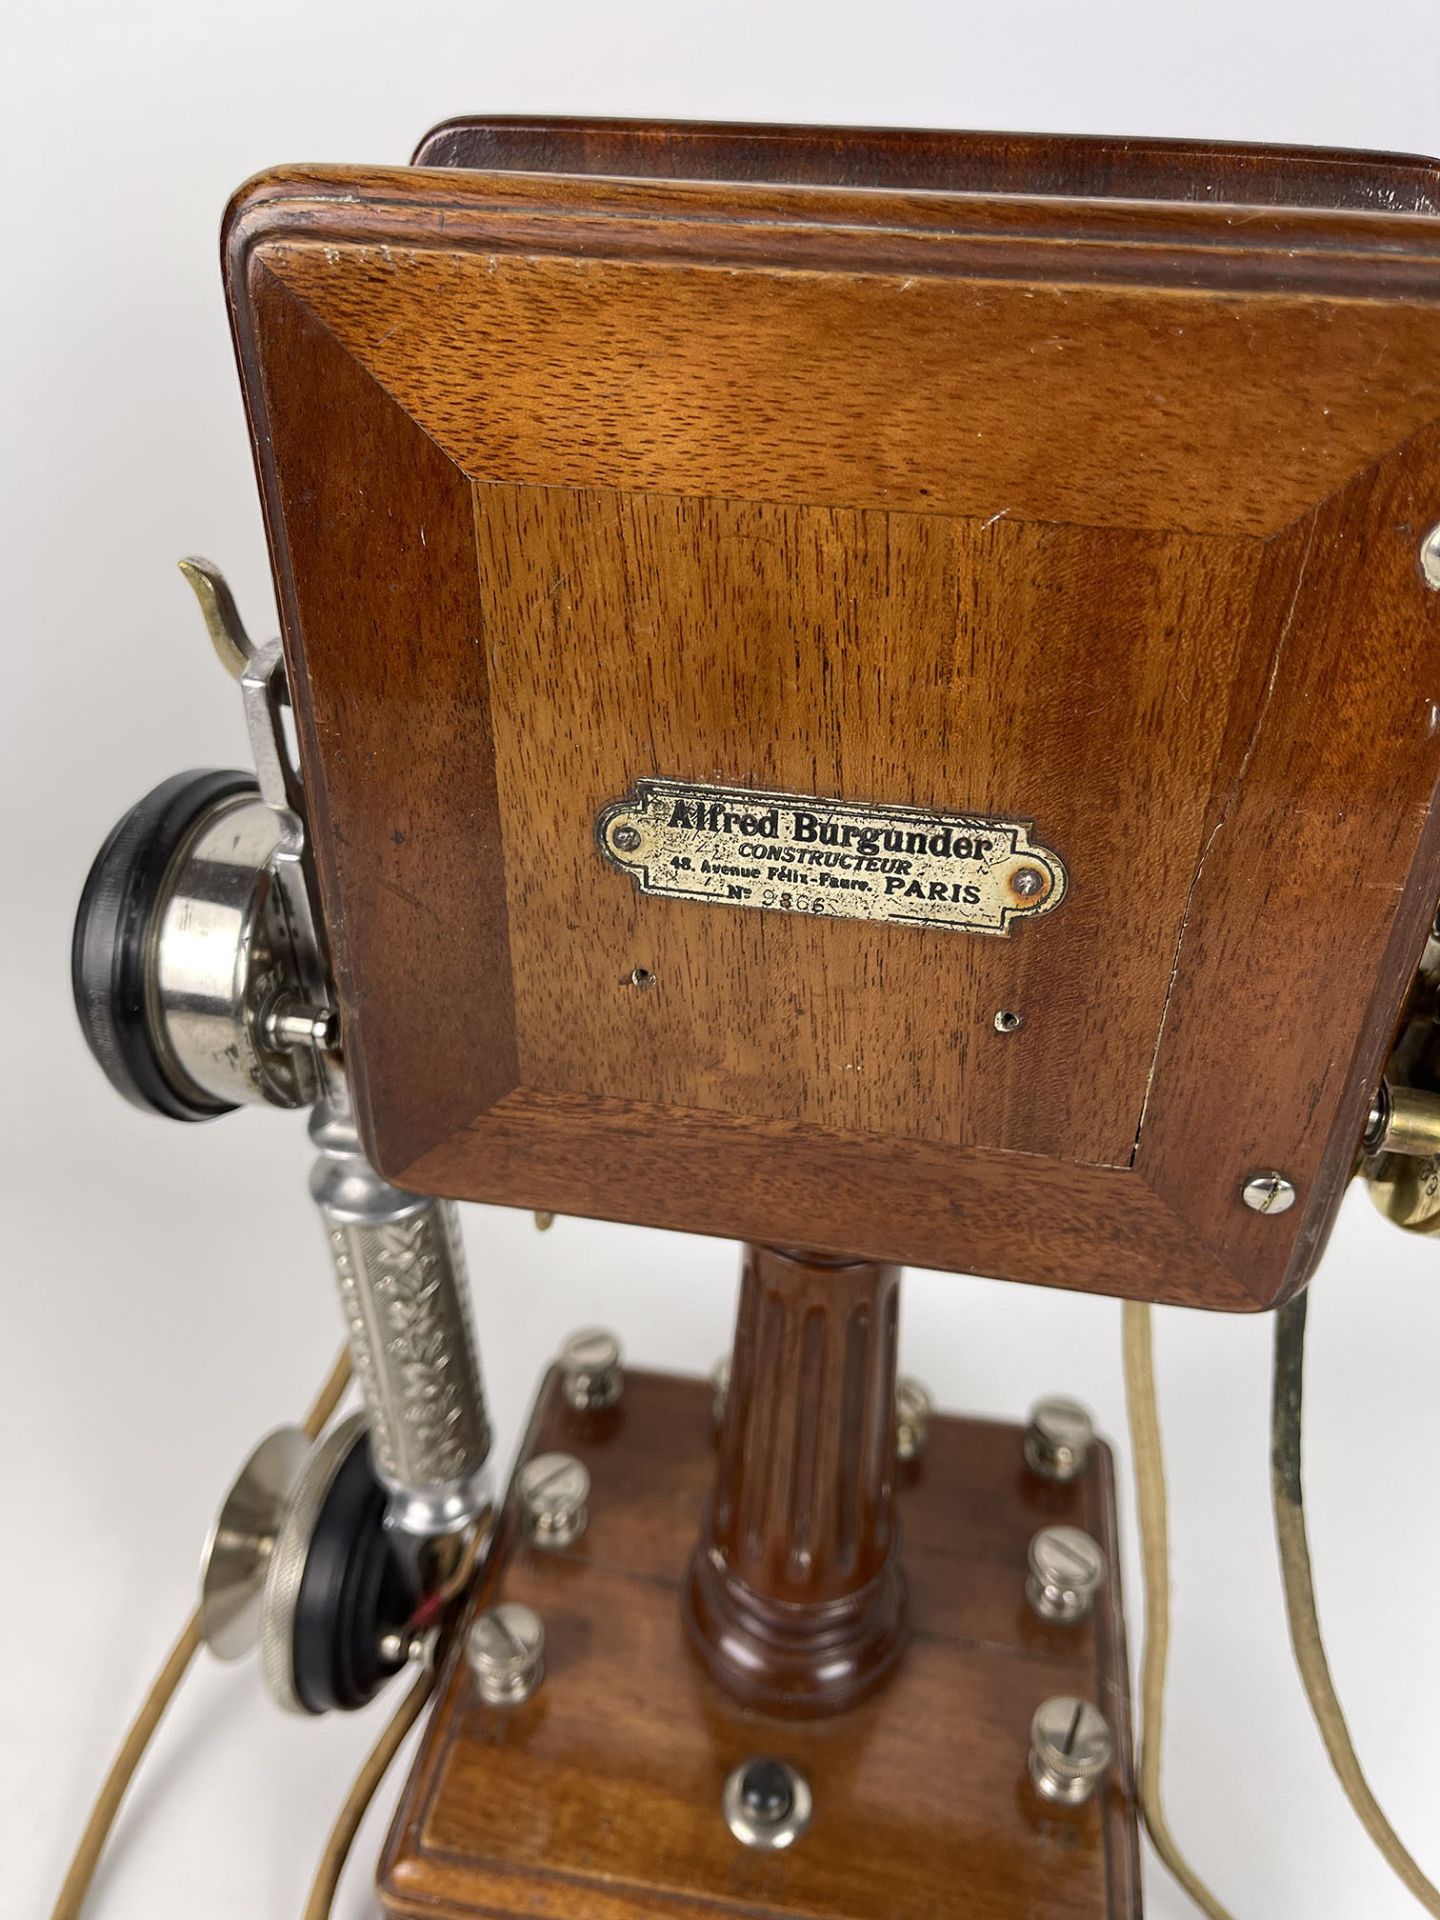 Early Alfred Burgunder Mobile Telephone, ca. 1910, France - Image 12 of 13